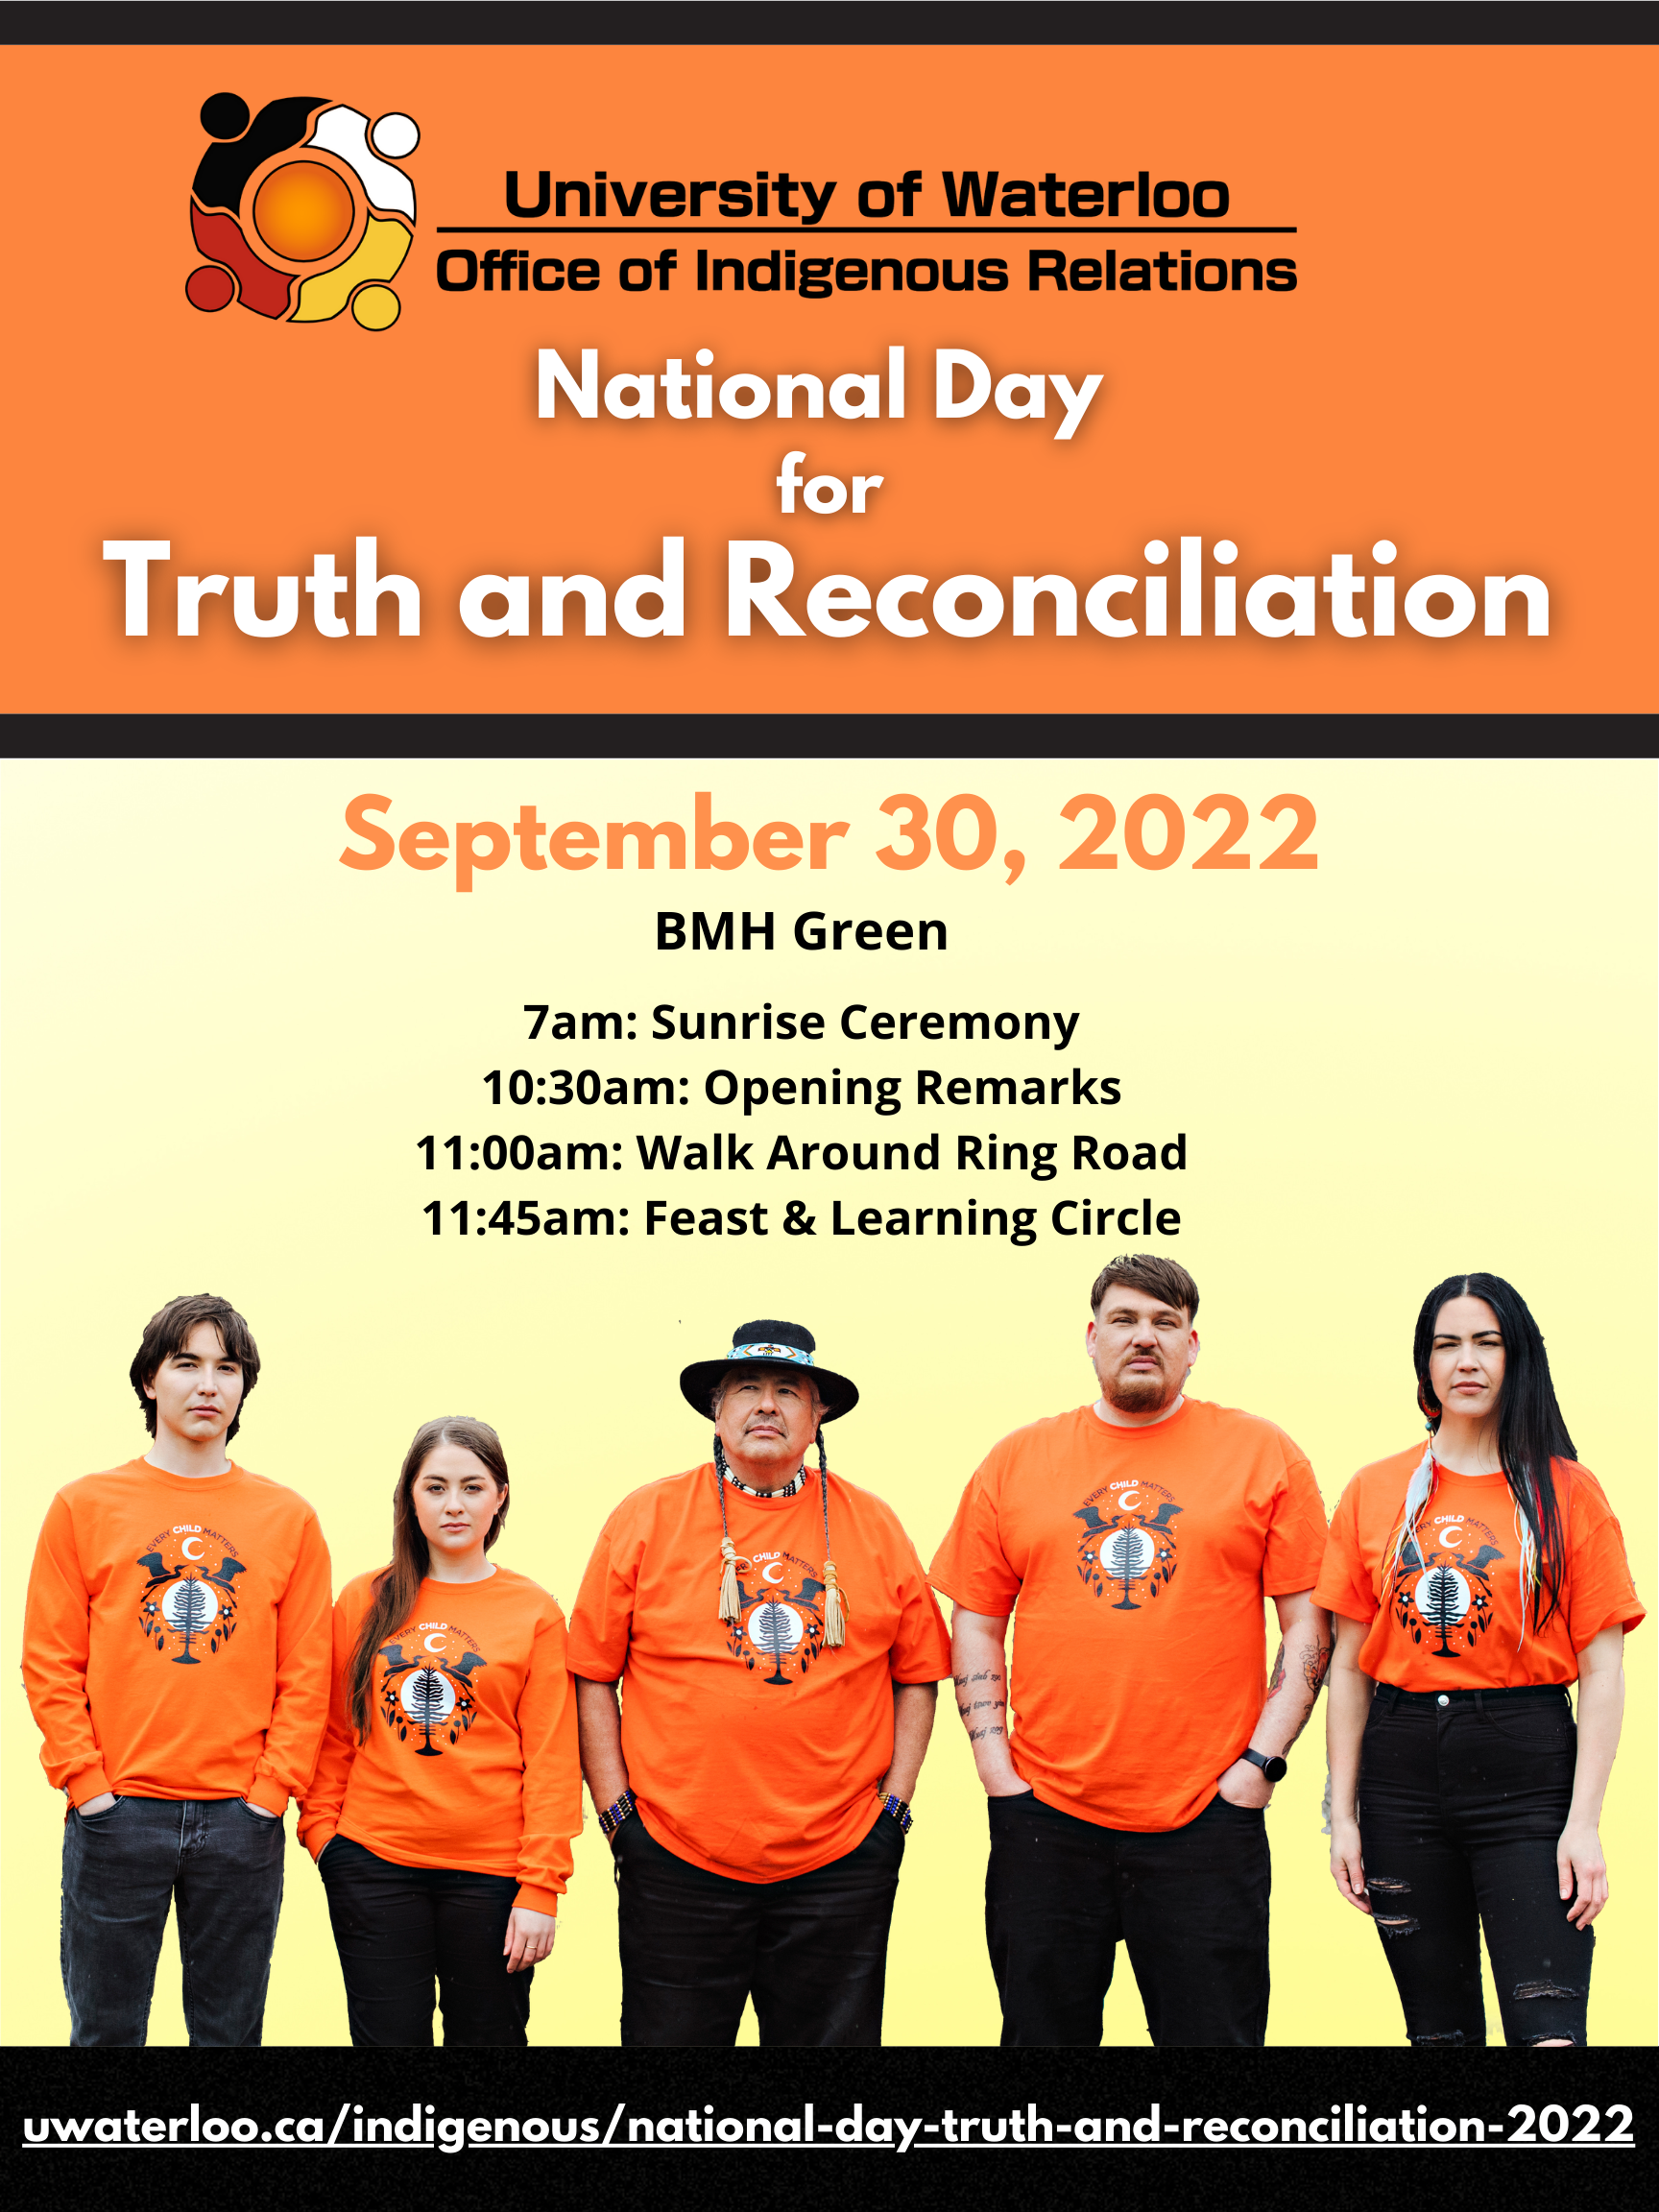 Event poster with date, time, location and group of individuals wearing orange shirts.